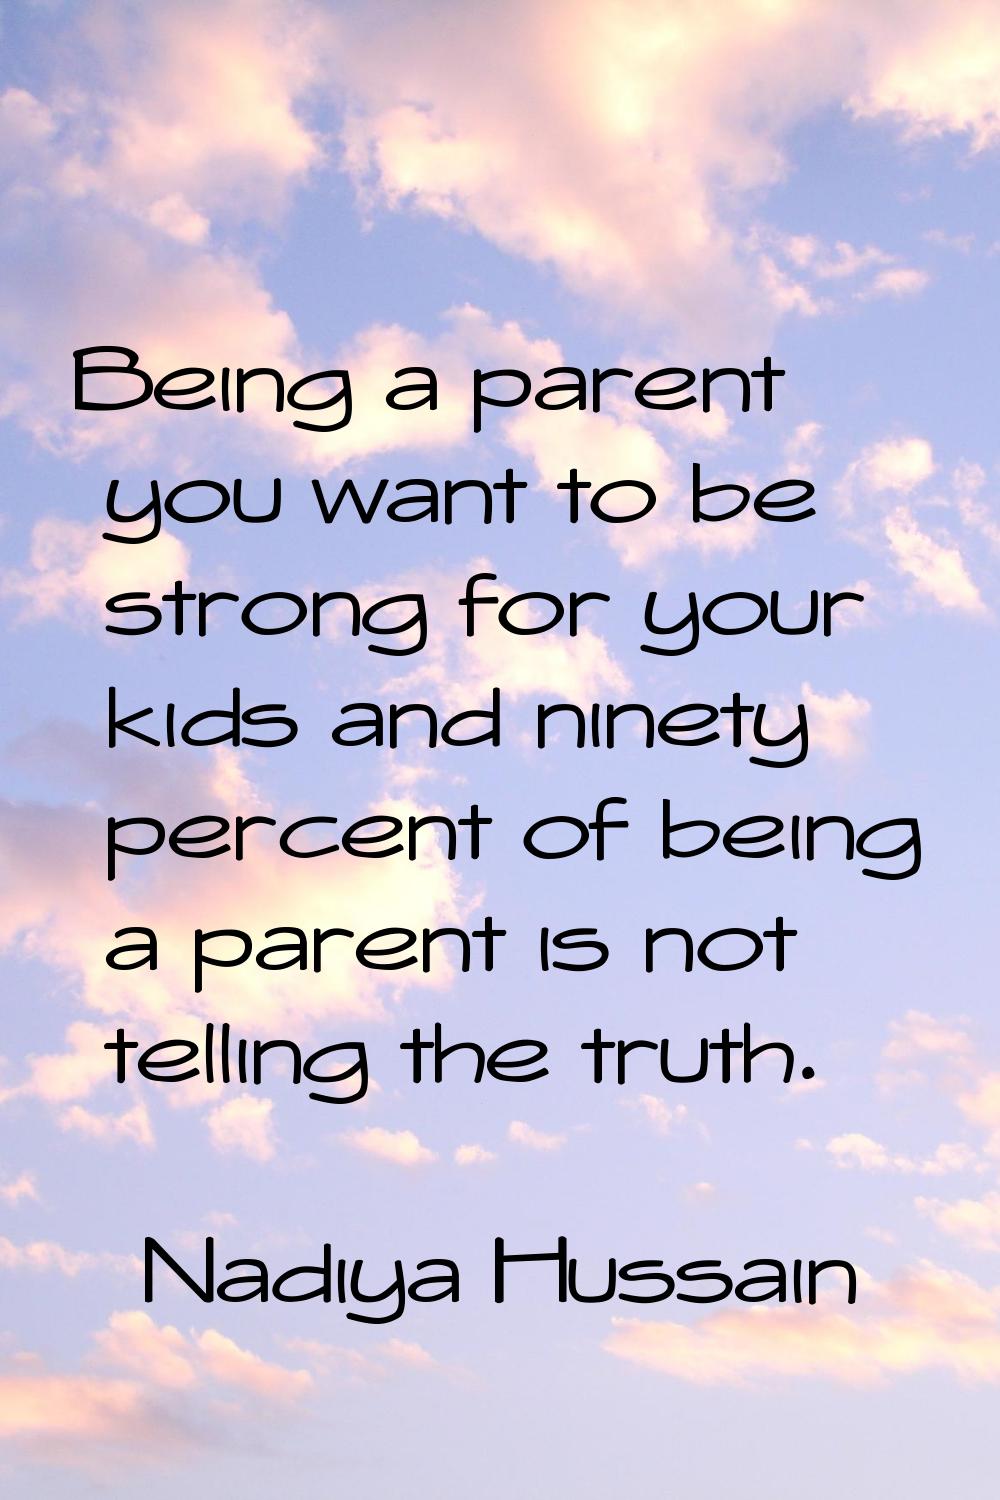 Being a parent you want to be strong for your kids and ninety percent of being a parent is not tell